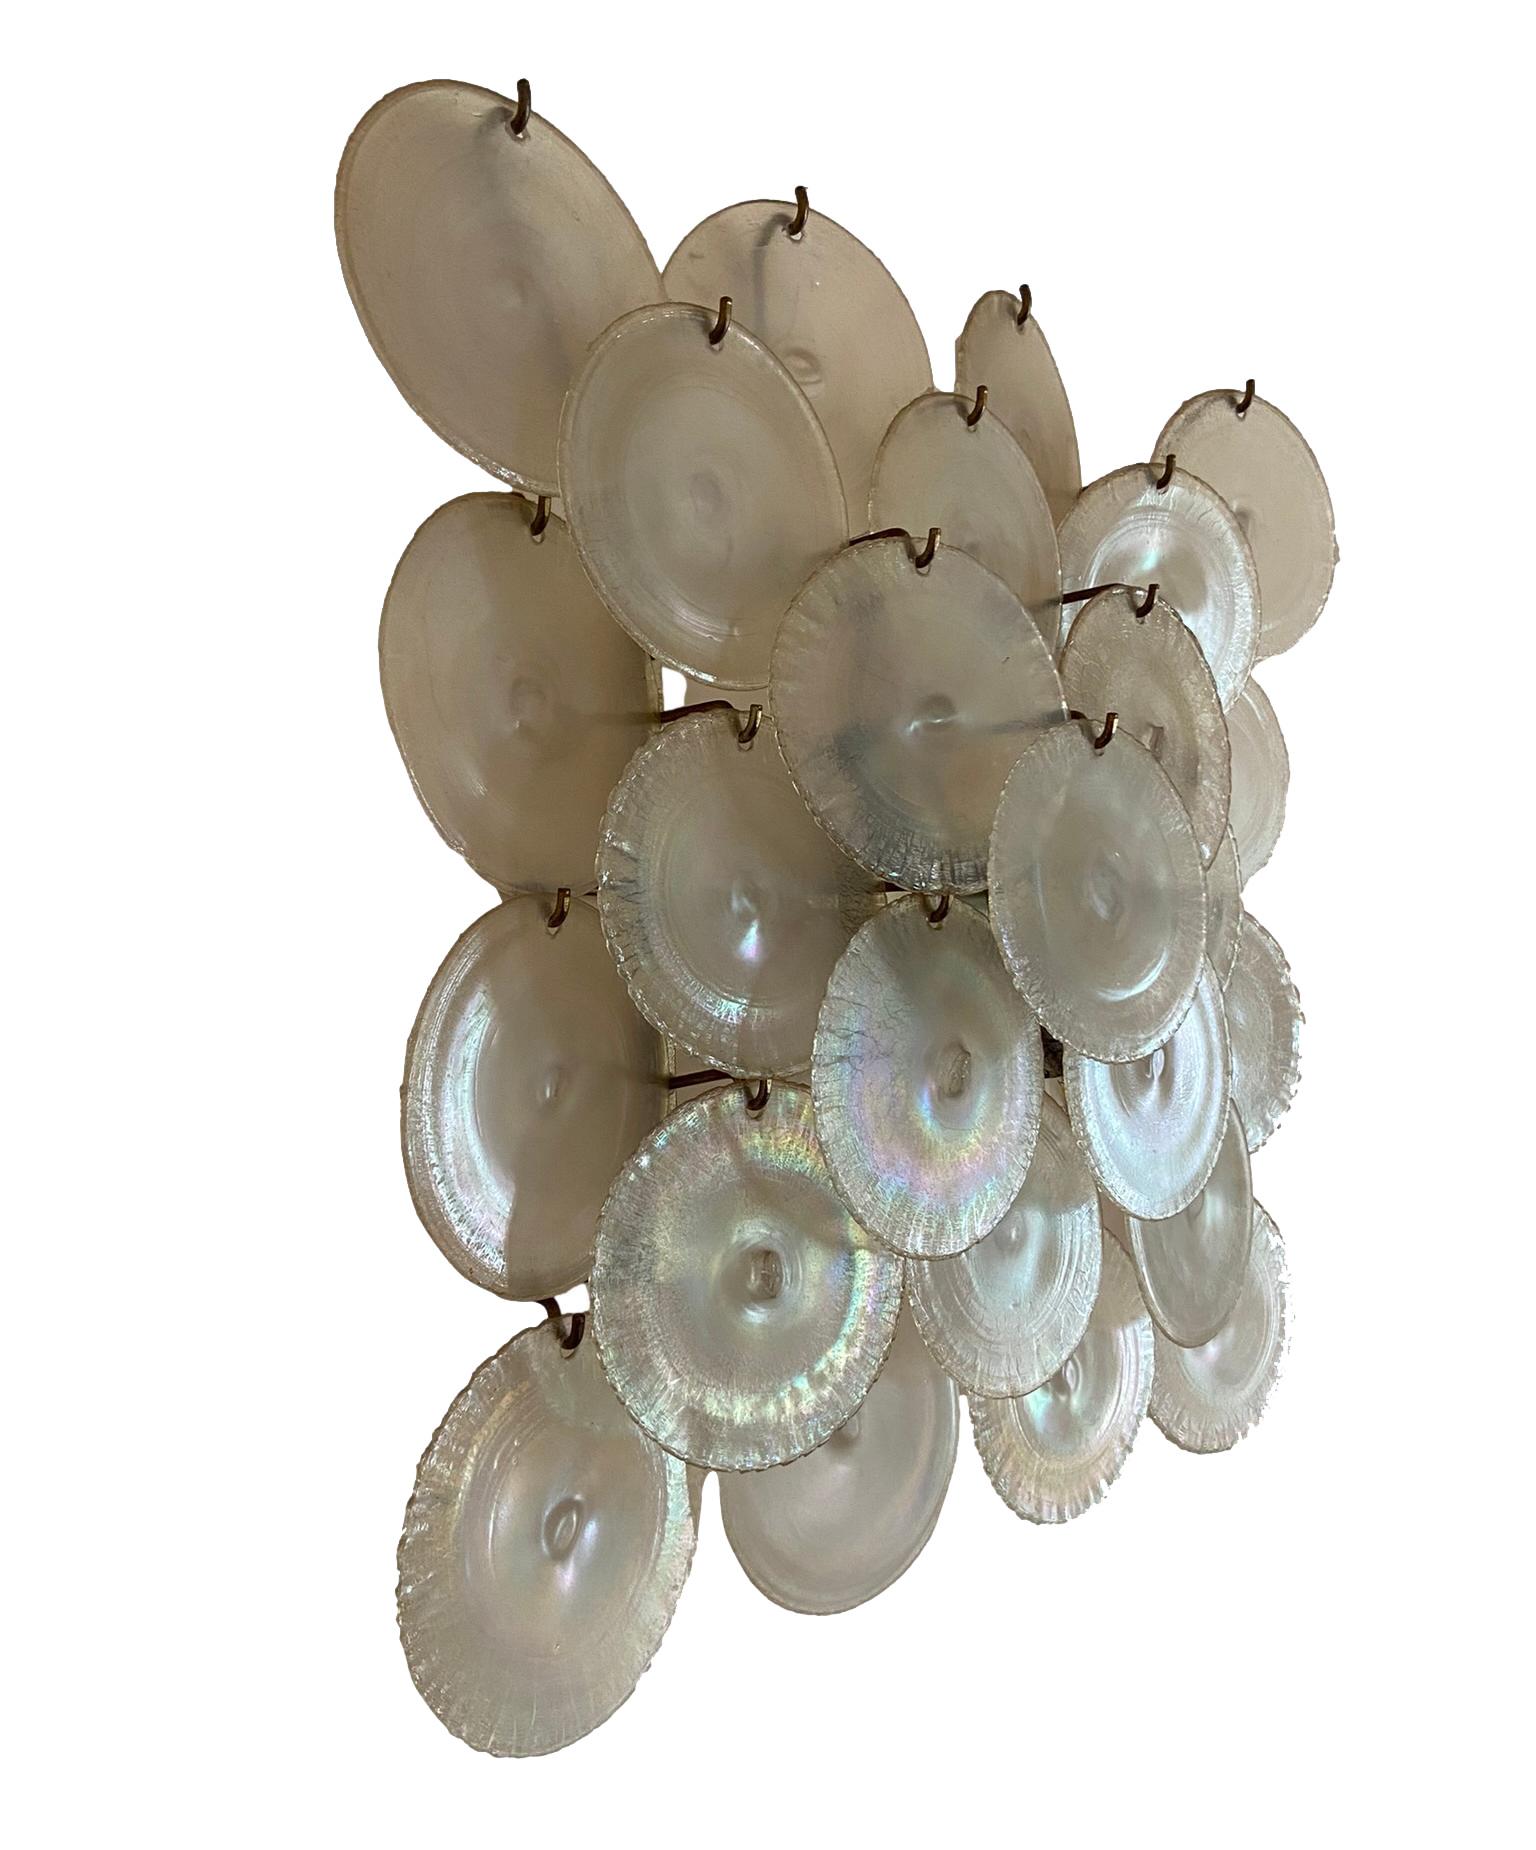 Large disc-shaped applique in irridescent Murano glass designed by Carlo Nason for Mazzega Murano, Italy 1960. The applique rests on a nickel-plated metal structure with four light sources.  Very good condition.  The glass, now impossible to find,